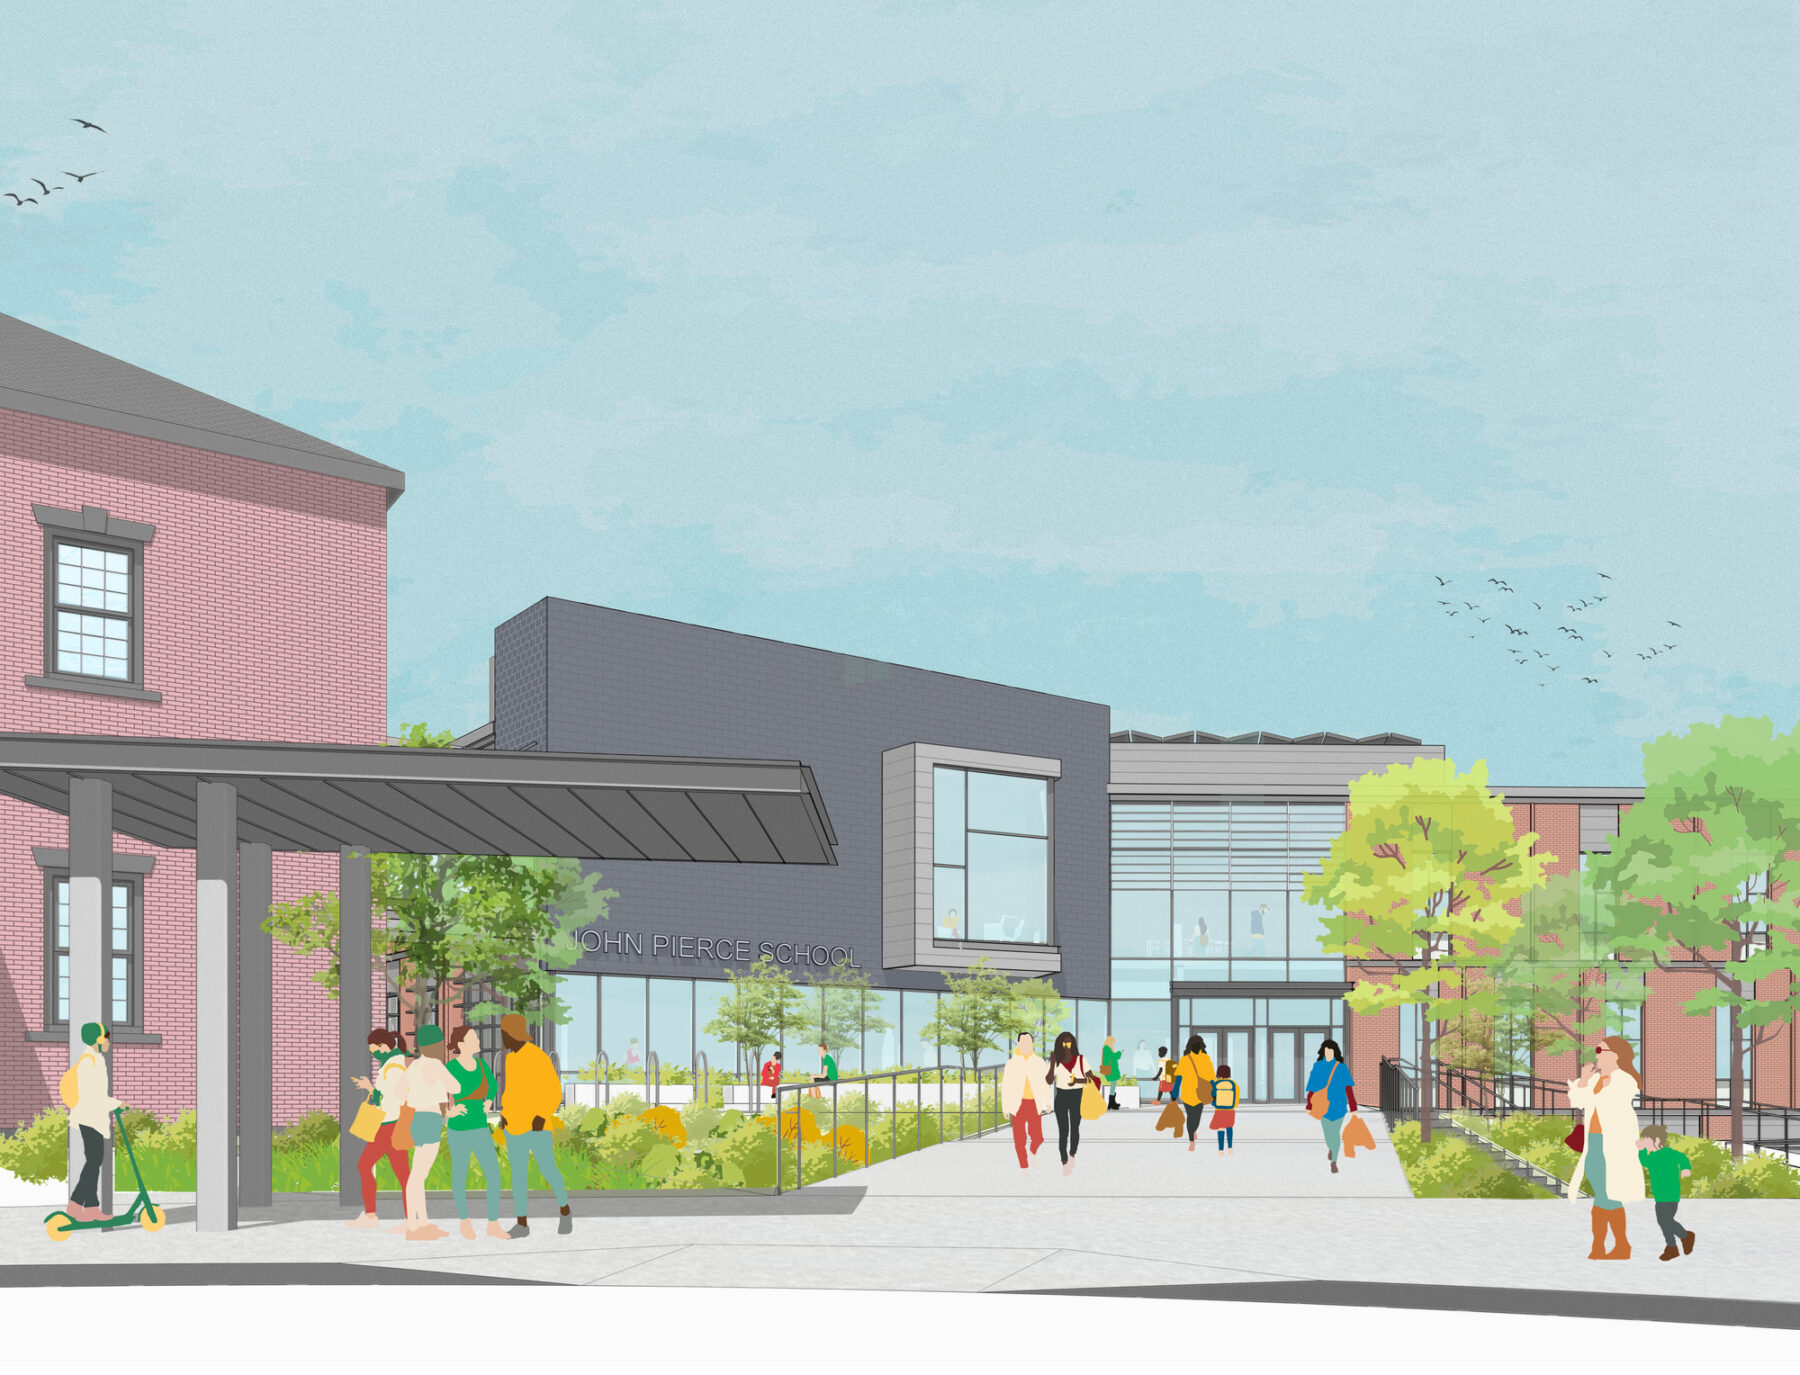 Collaged rendering of the school's main entry plaza with students arriving